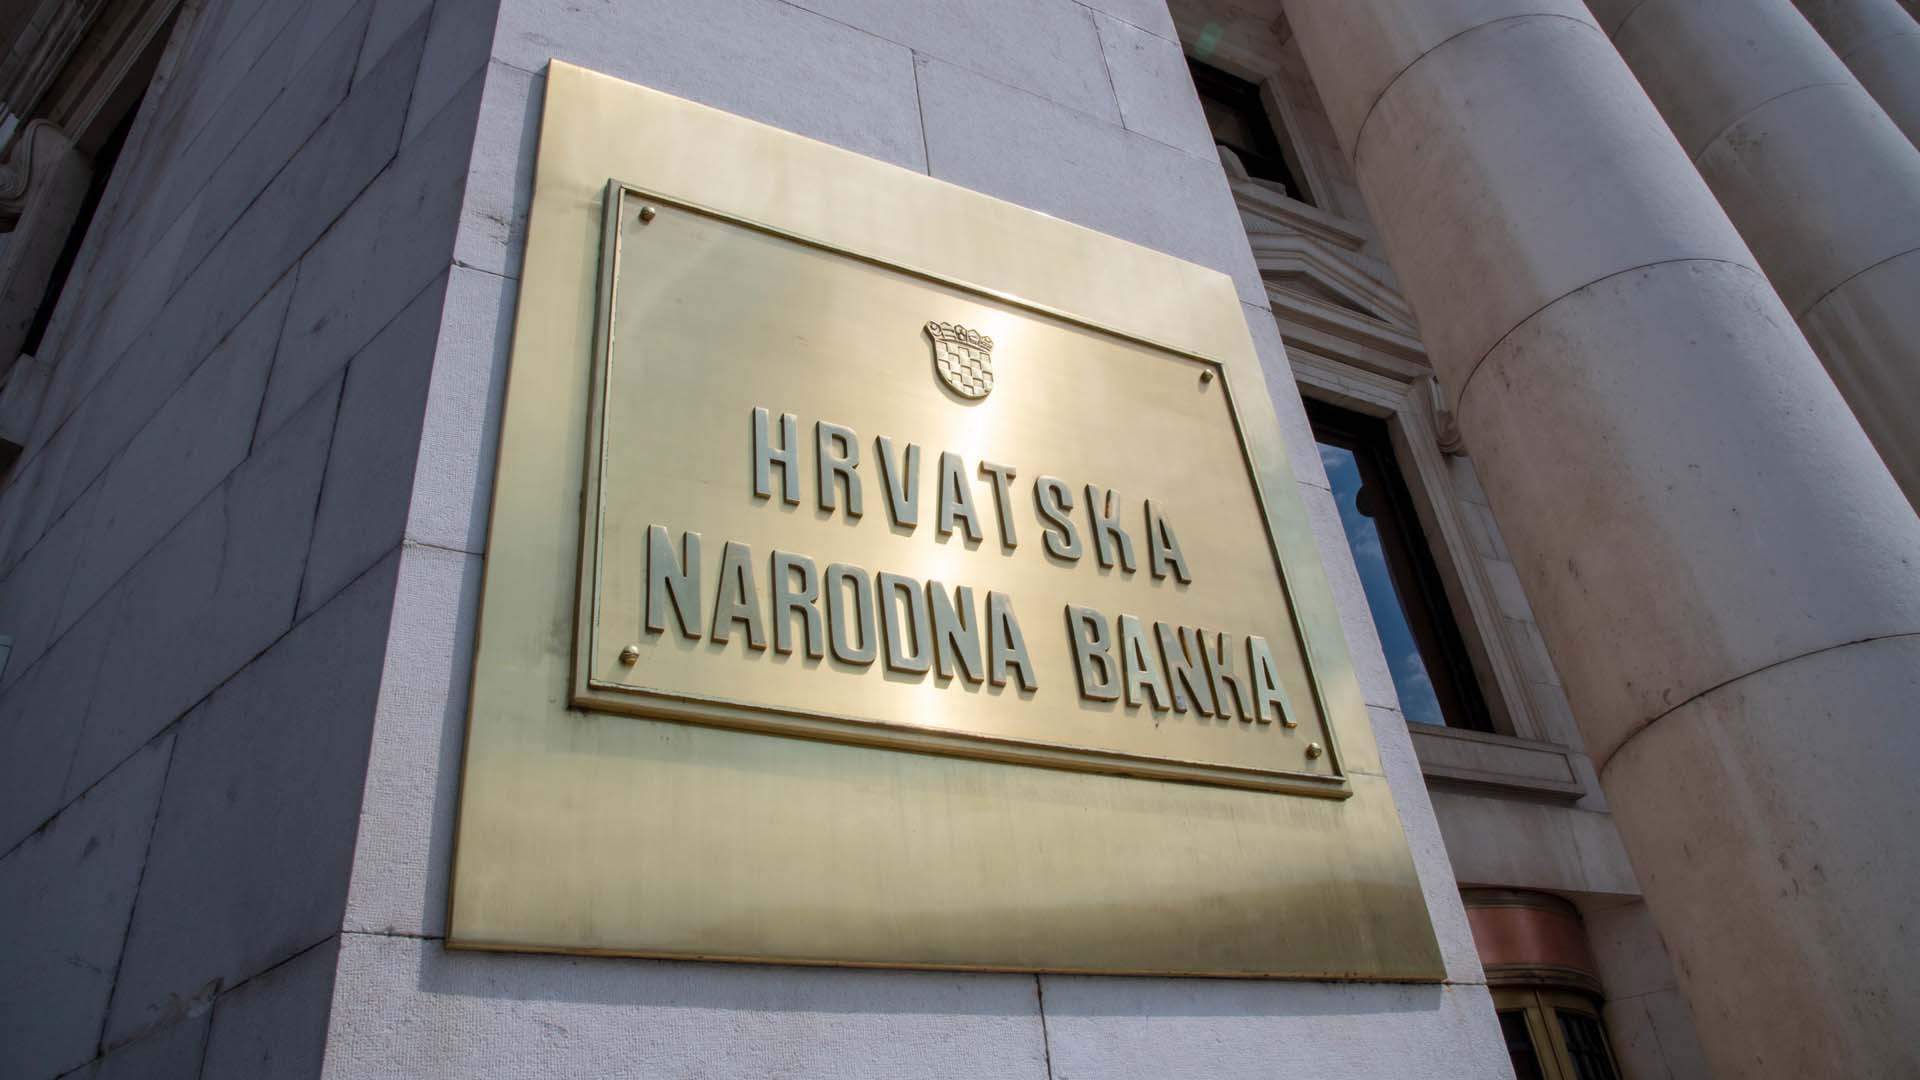 CNB Council: New macroeconomic projections for Croatia